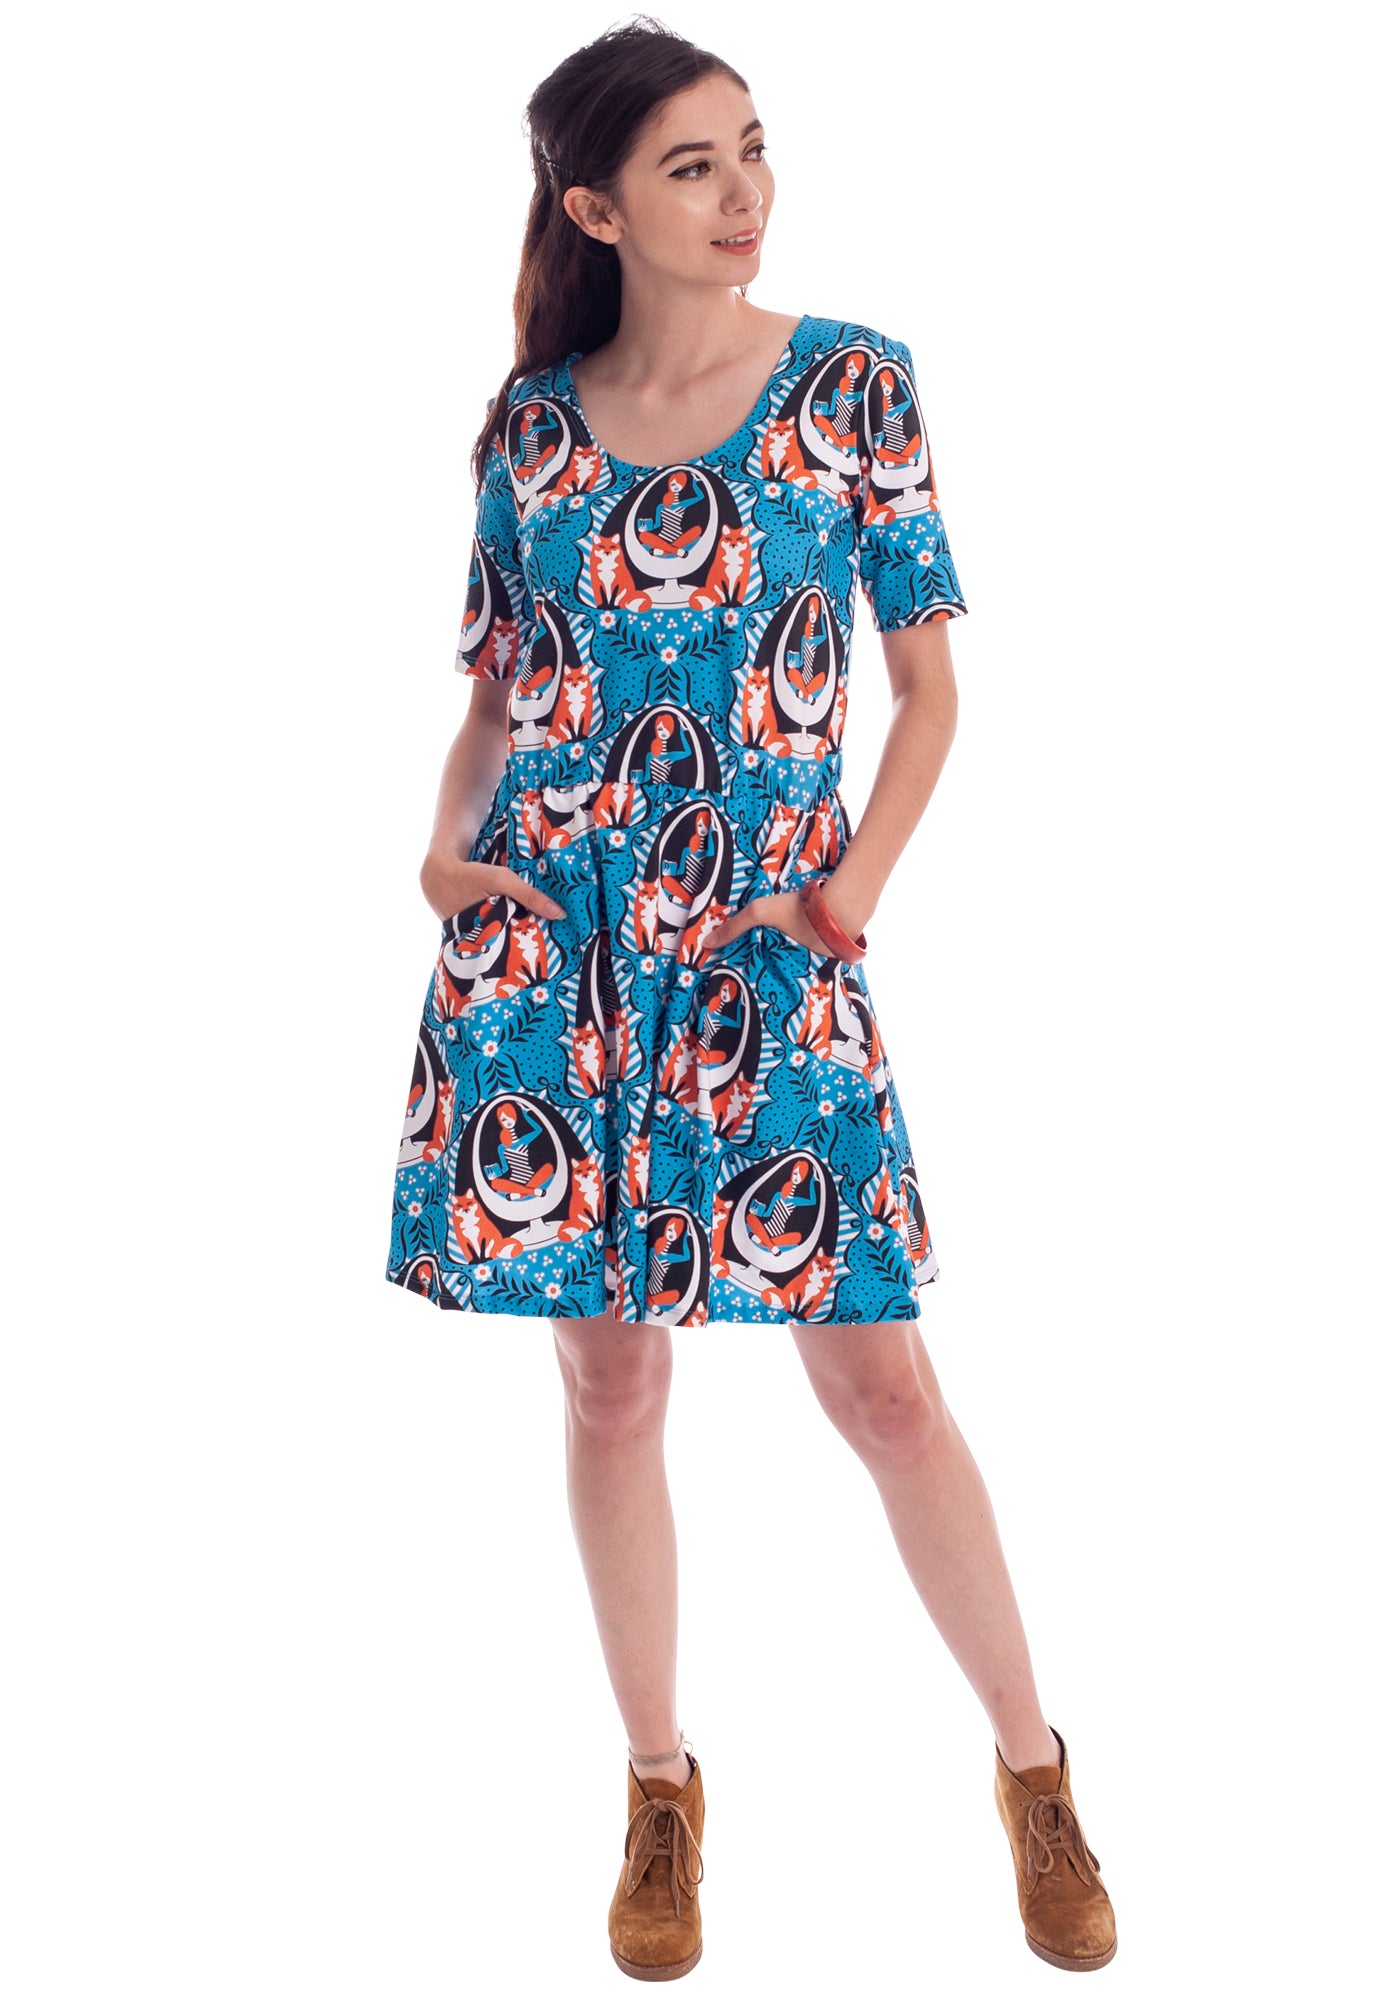 Dark haired model wearing bright blue dres with graphic of redhead girl sitting in egg chair flanked by two foxes